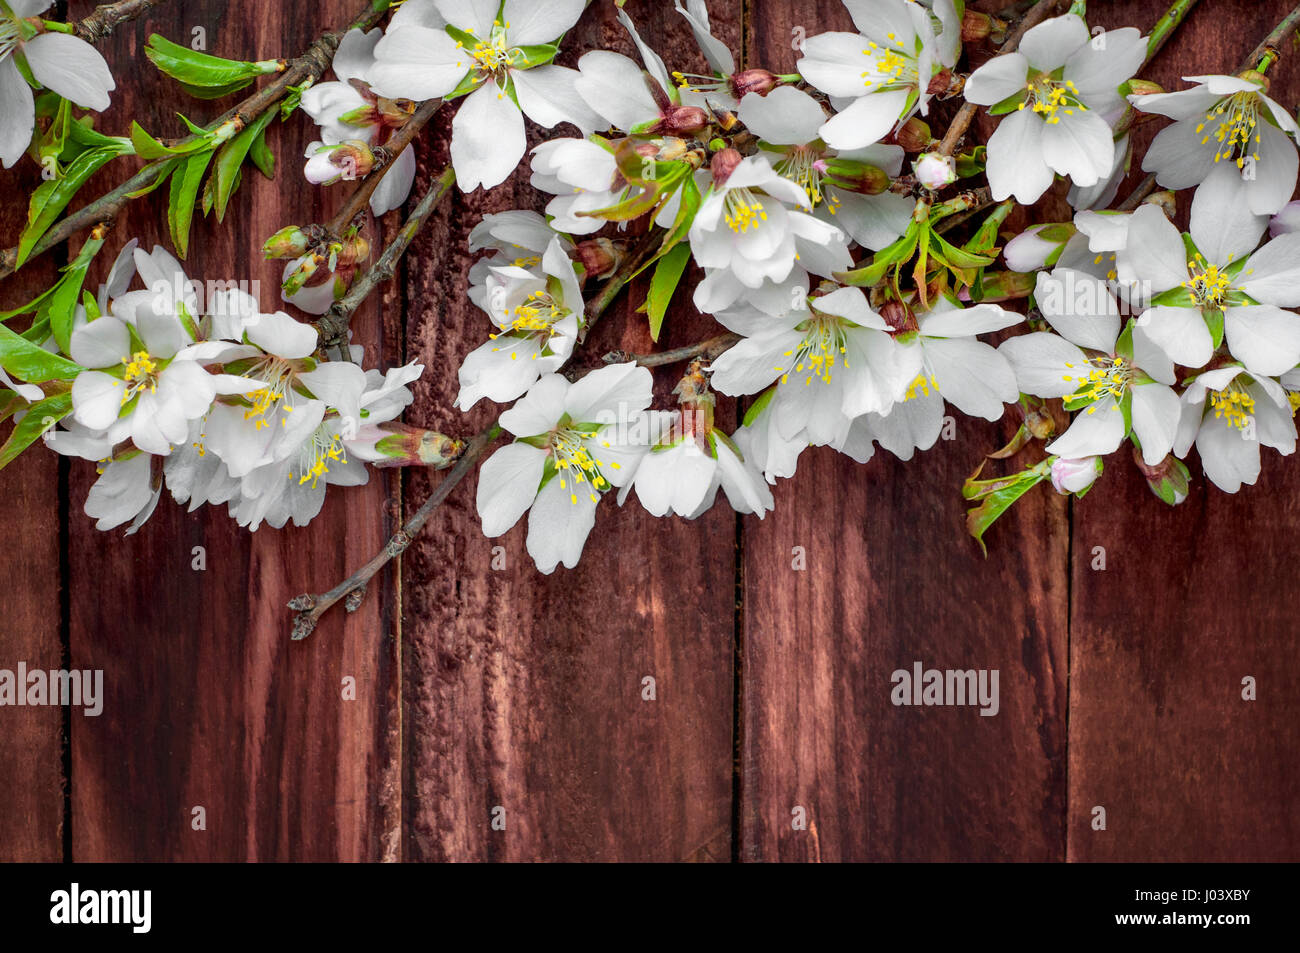 Flowering almond branches on a brown wooden surface, empty space at the bottom Stock Photo